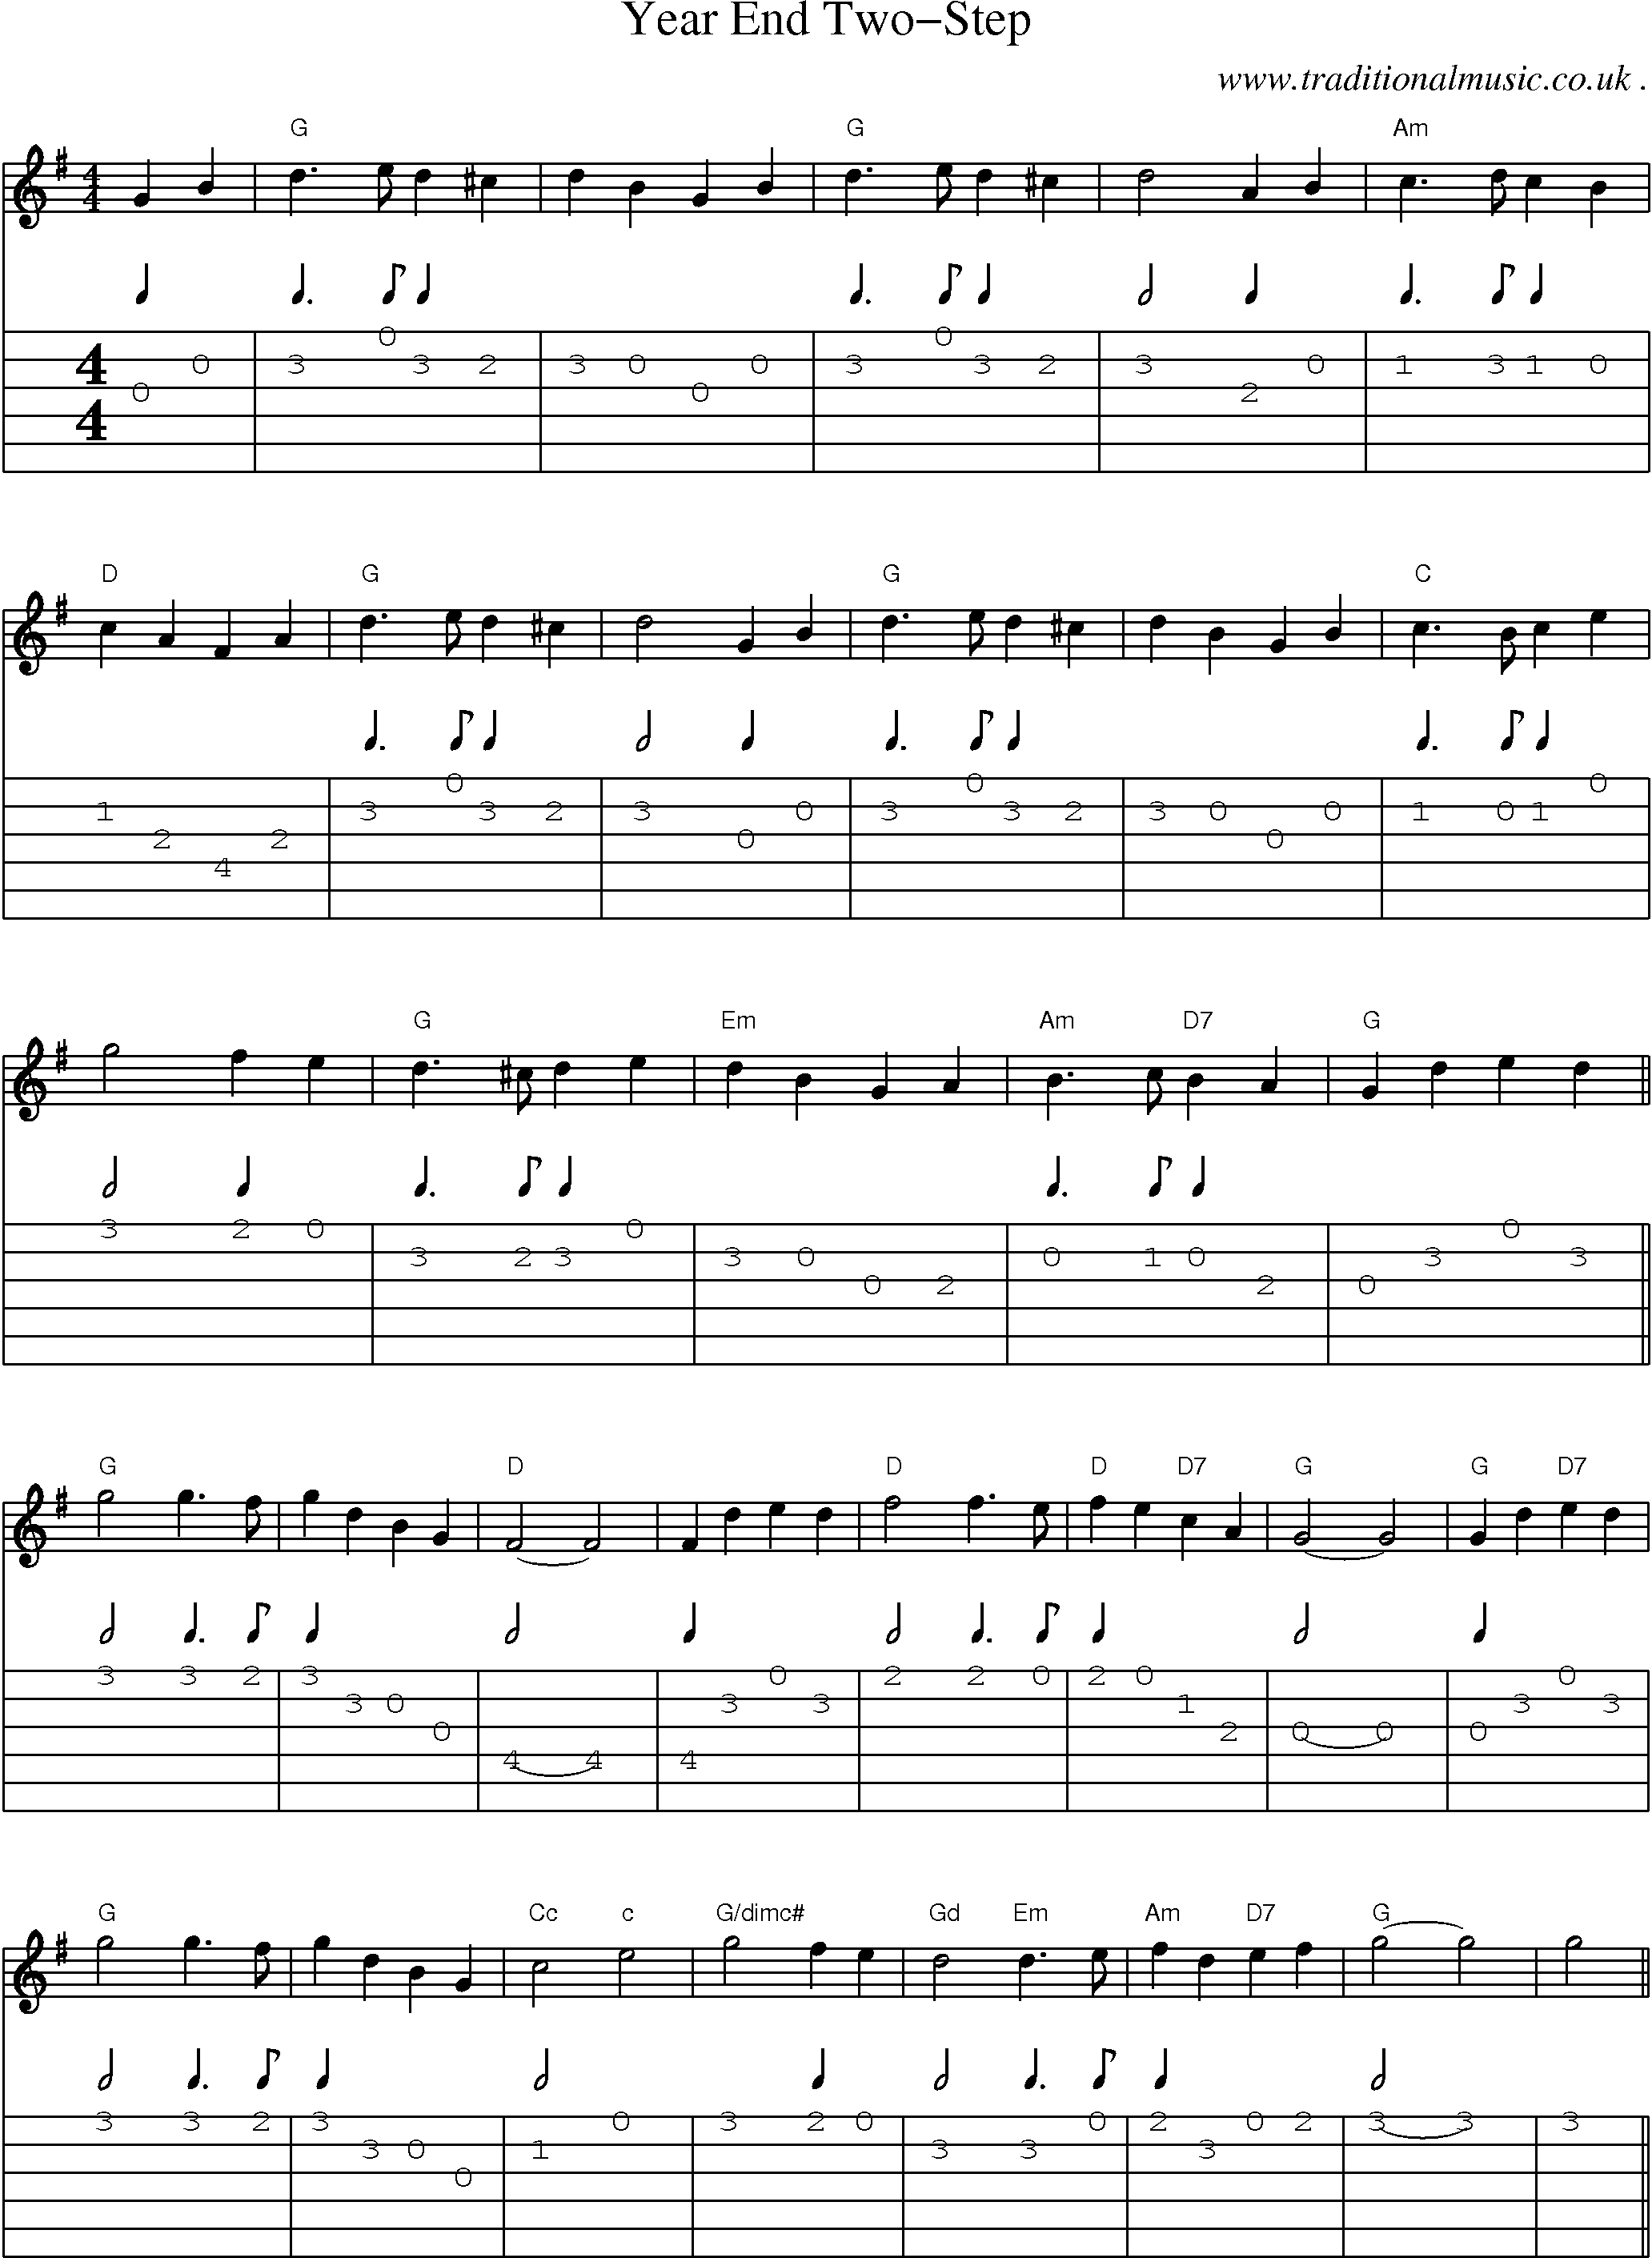 Sheet-Music and Guitar Tabs for Year End Two-step